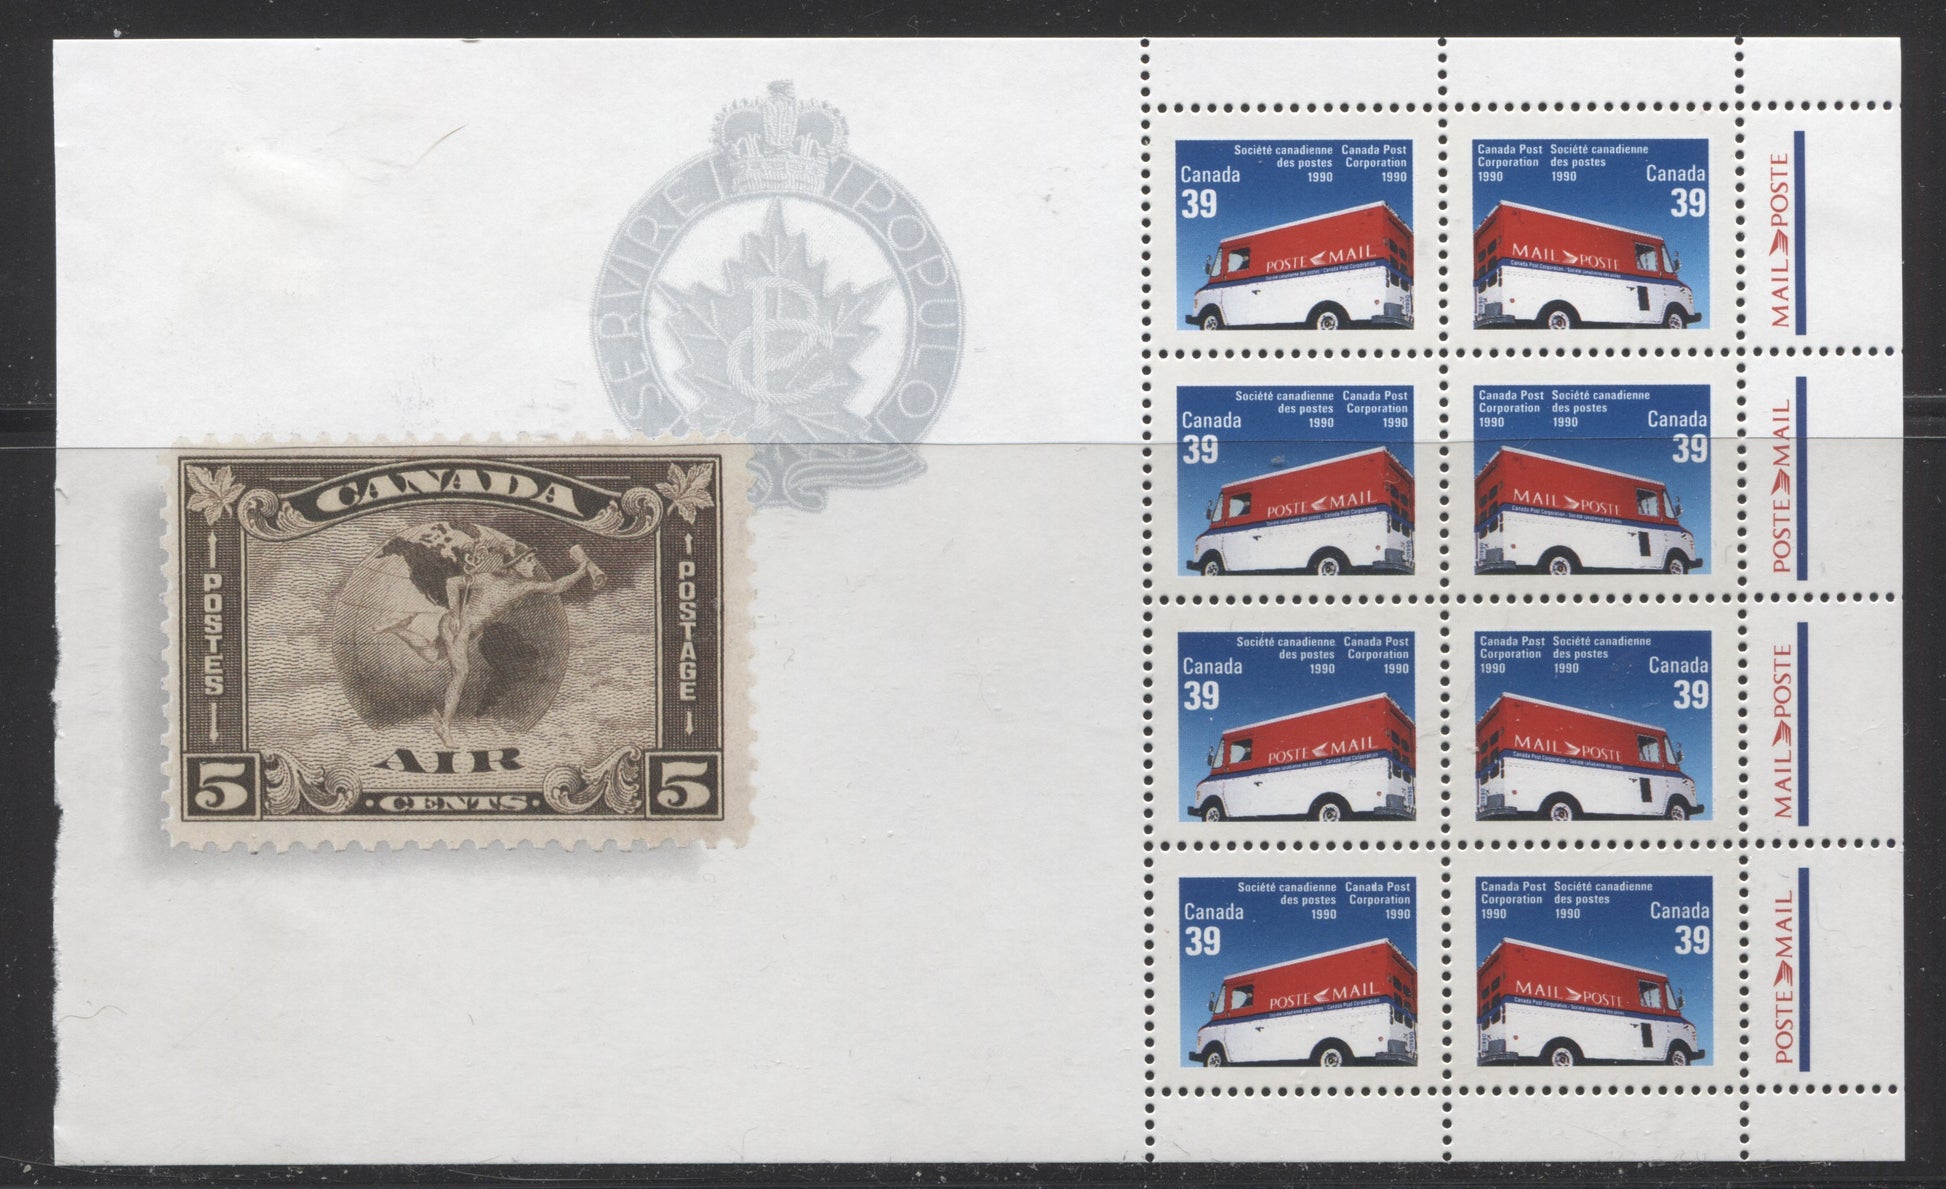 Canada #BK118-a 1990 Canada Post Issue, Complete $9.75 Booklet, Peterborough Paper, Dull Paper, 4 mm GT-4 Tagging Brixton Chrome 